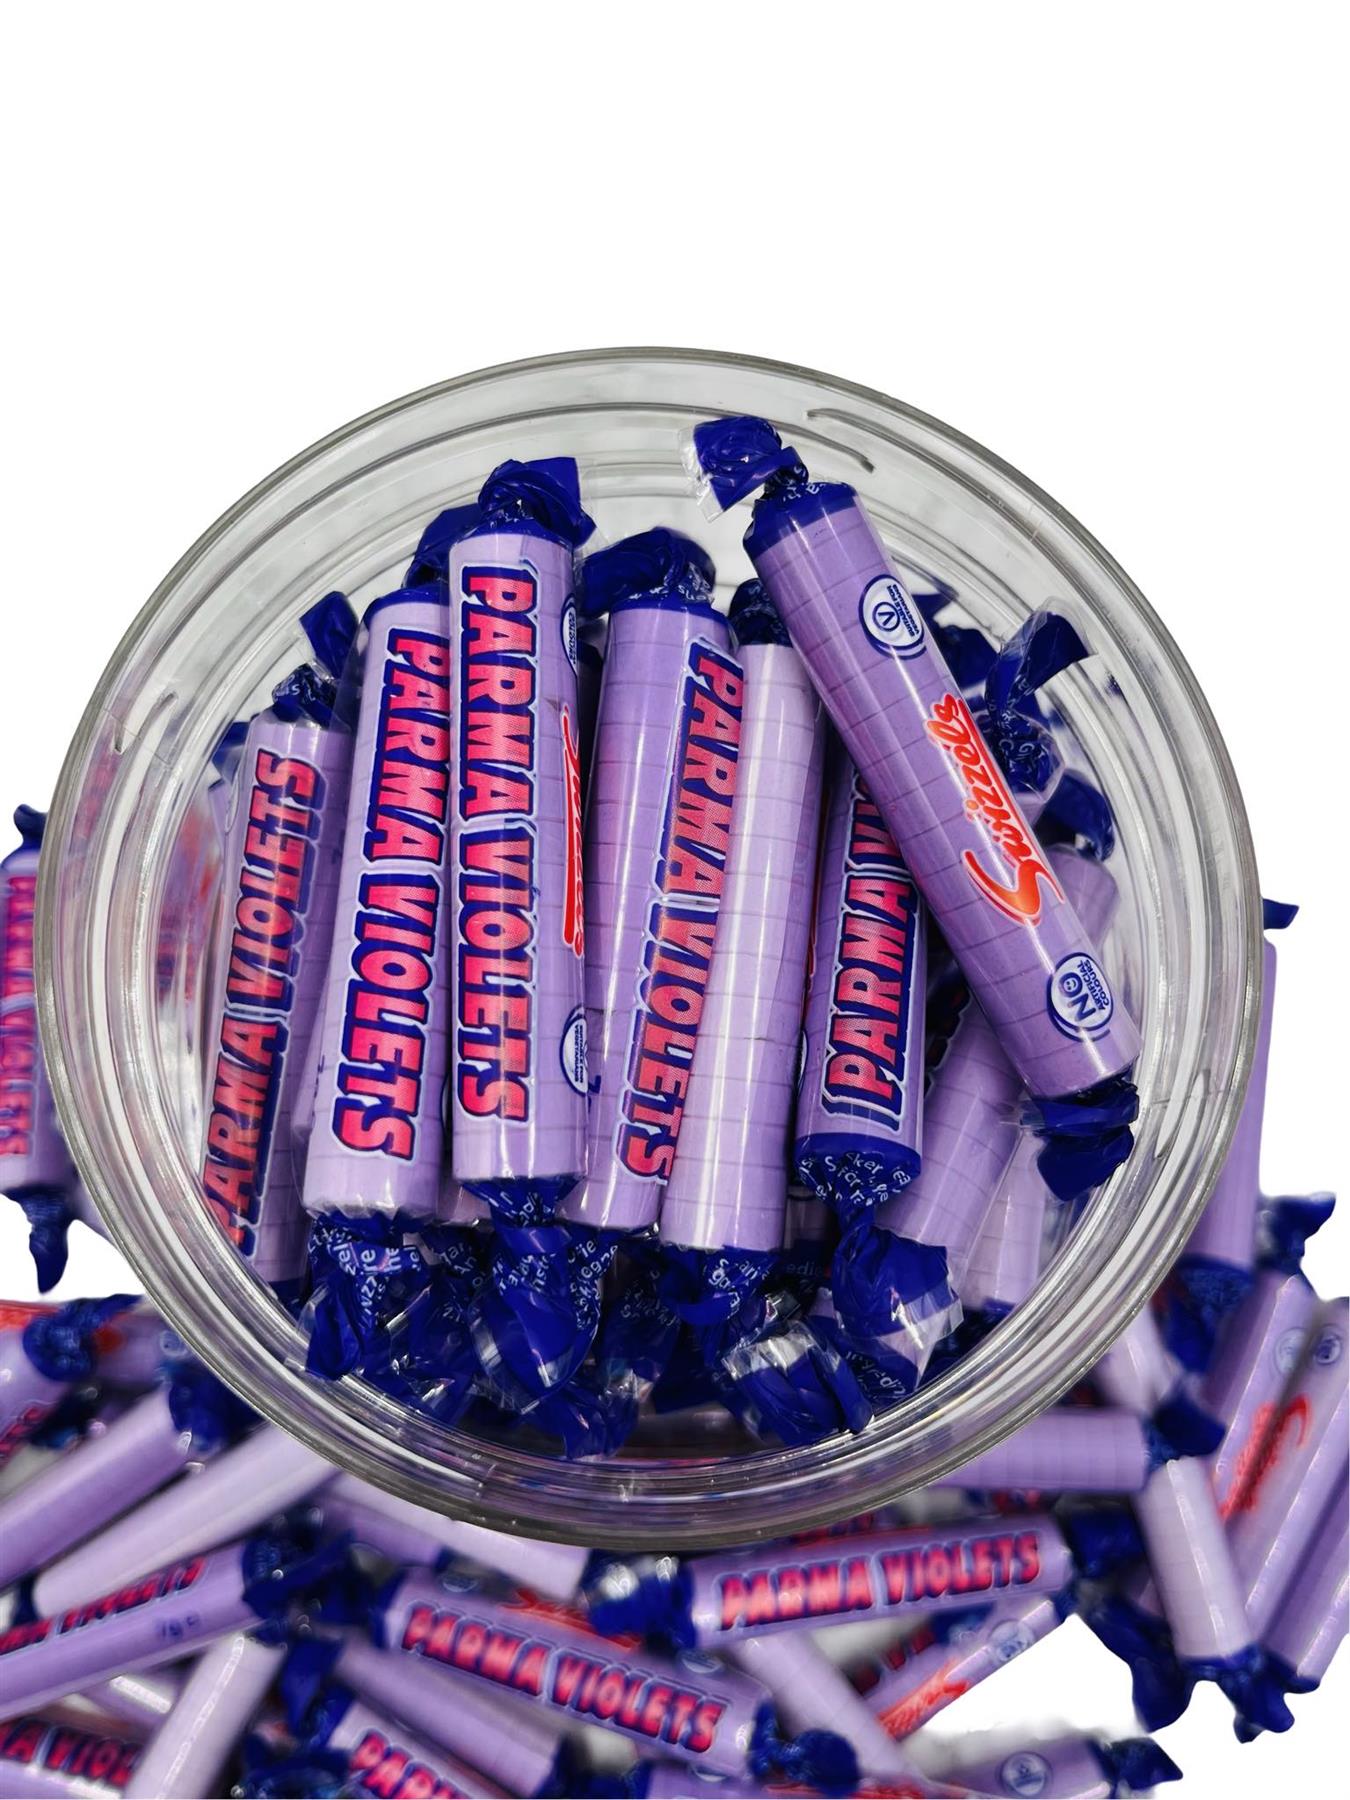 Simway Sweets Jar 580g - Swizzels Parma Violets - Individually Wrapped Sweets - Approximately 65 Pieces